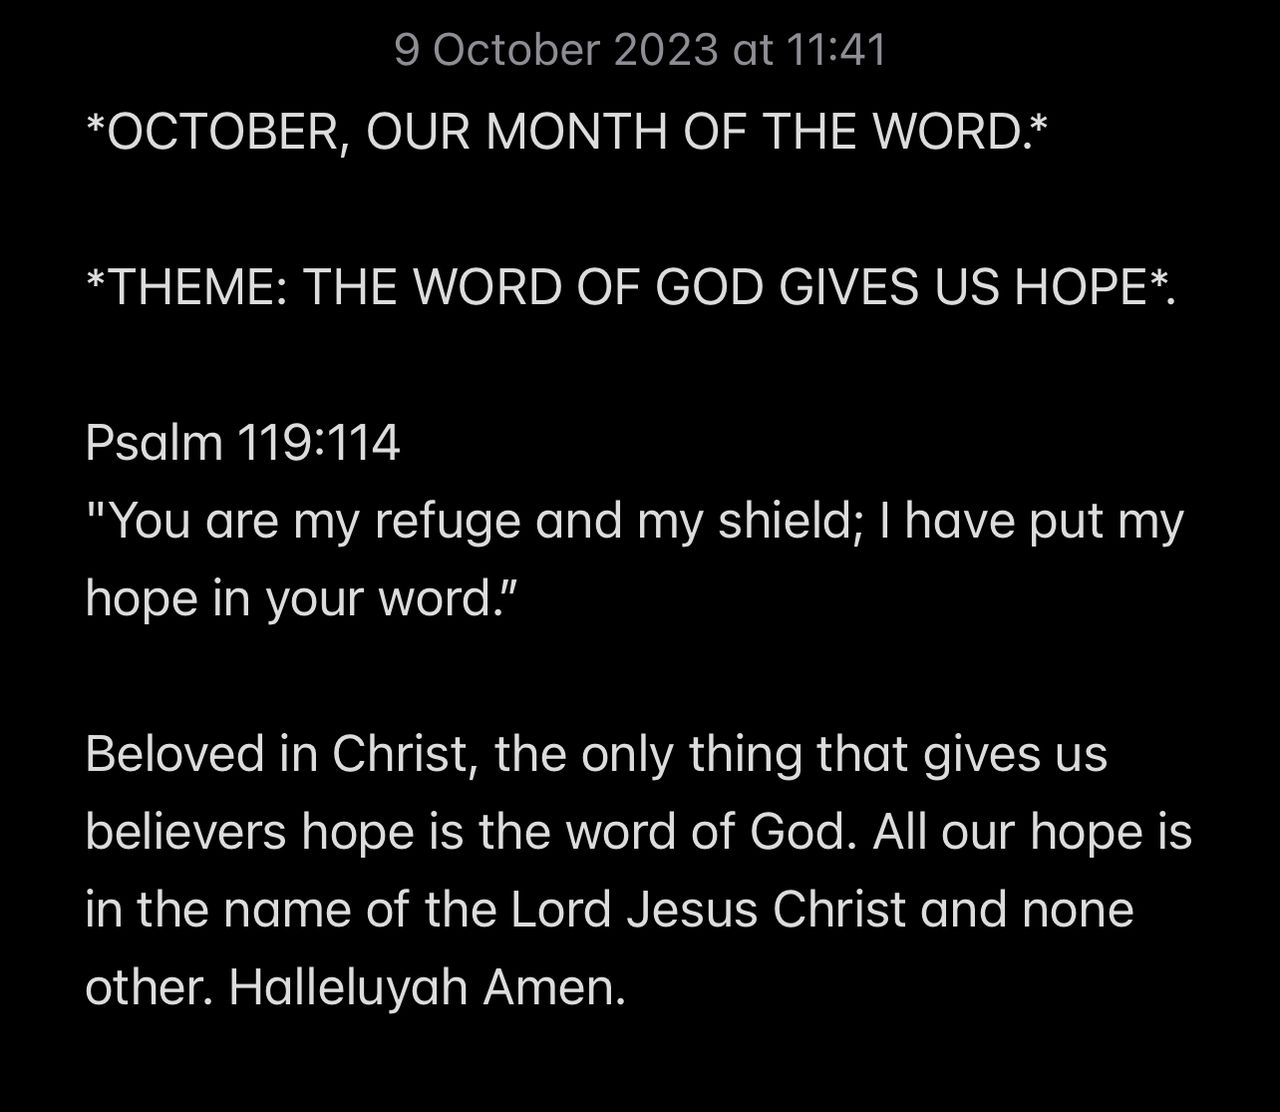 THE WORD OF GOD GIVES US HOPE.